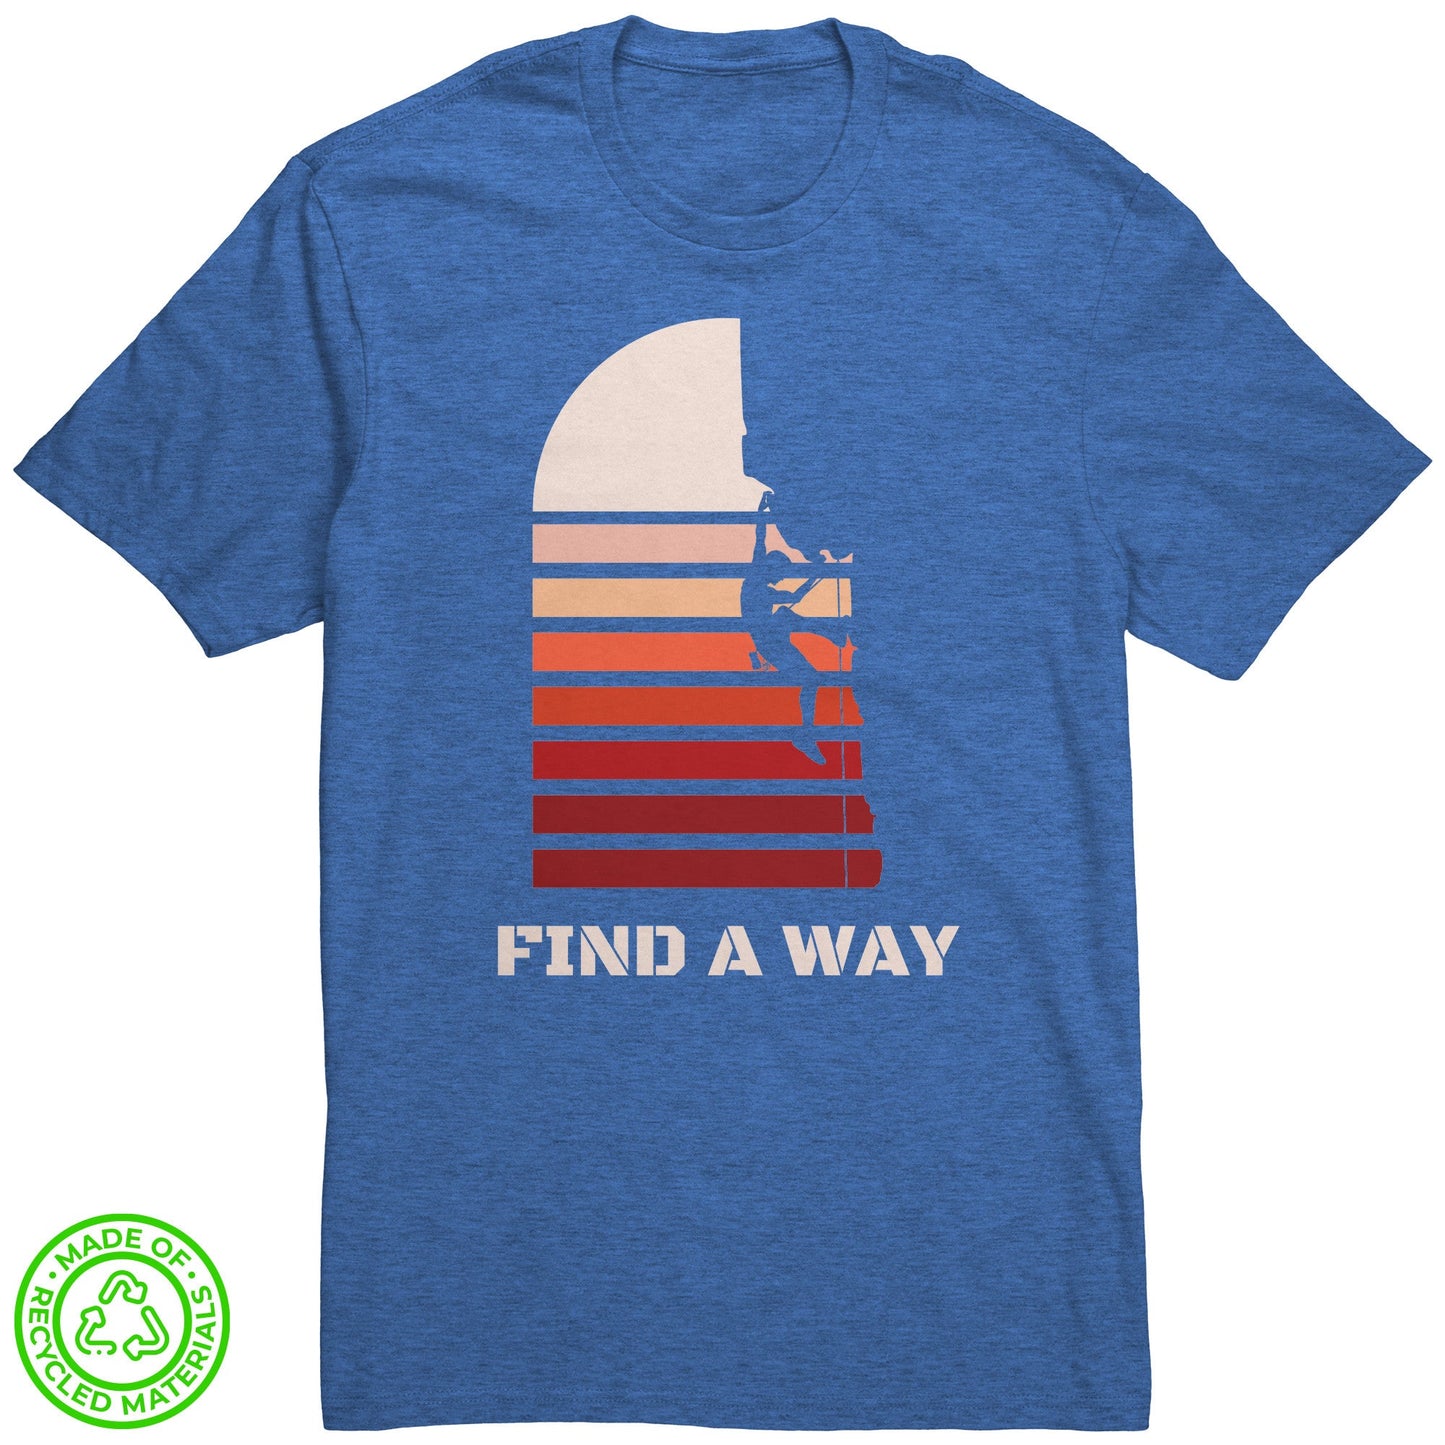 Eco-friendly Re-Tee (Find a way)